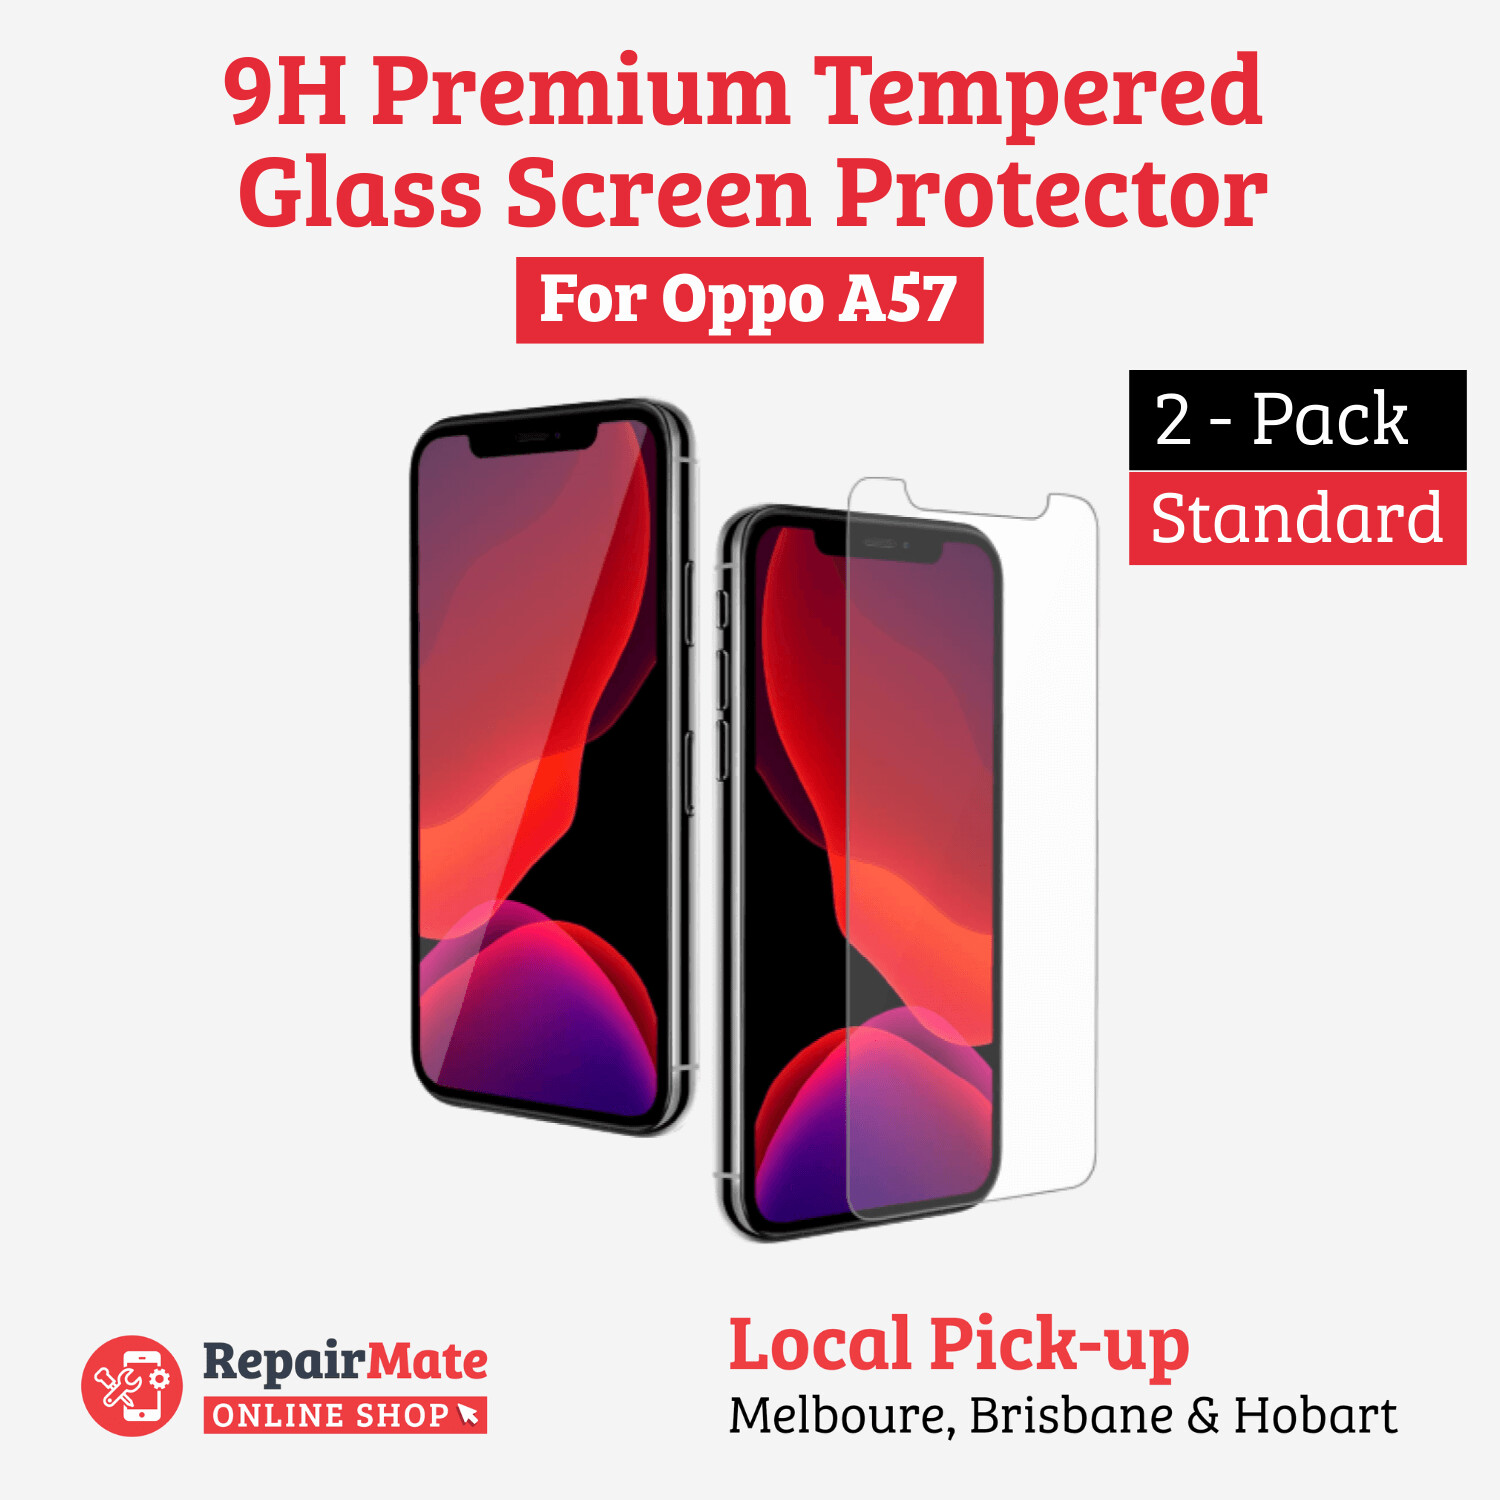 Oppo A57 9H Premium Tempered Glass Screen Protector [2 Pack]